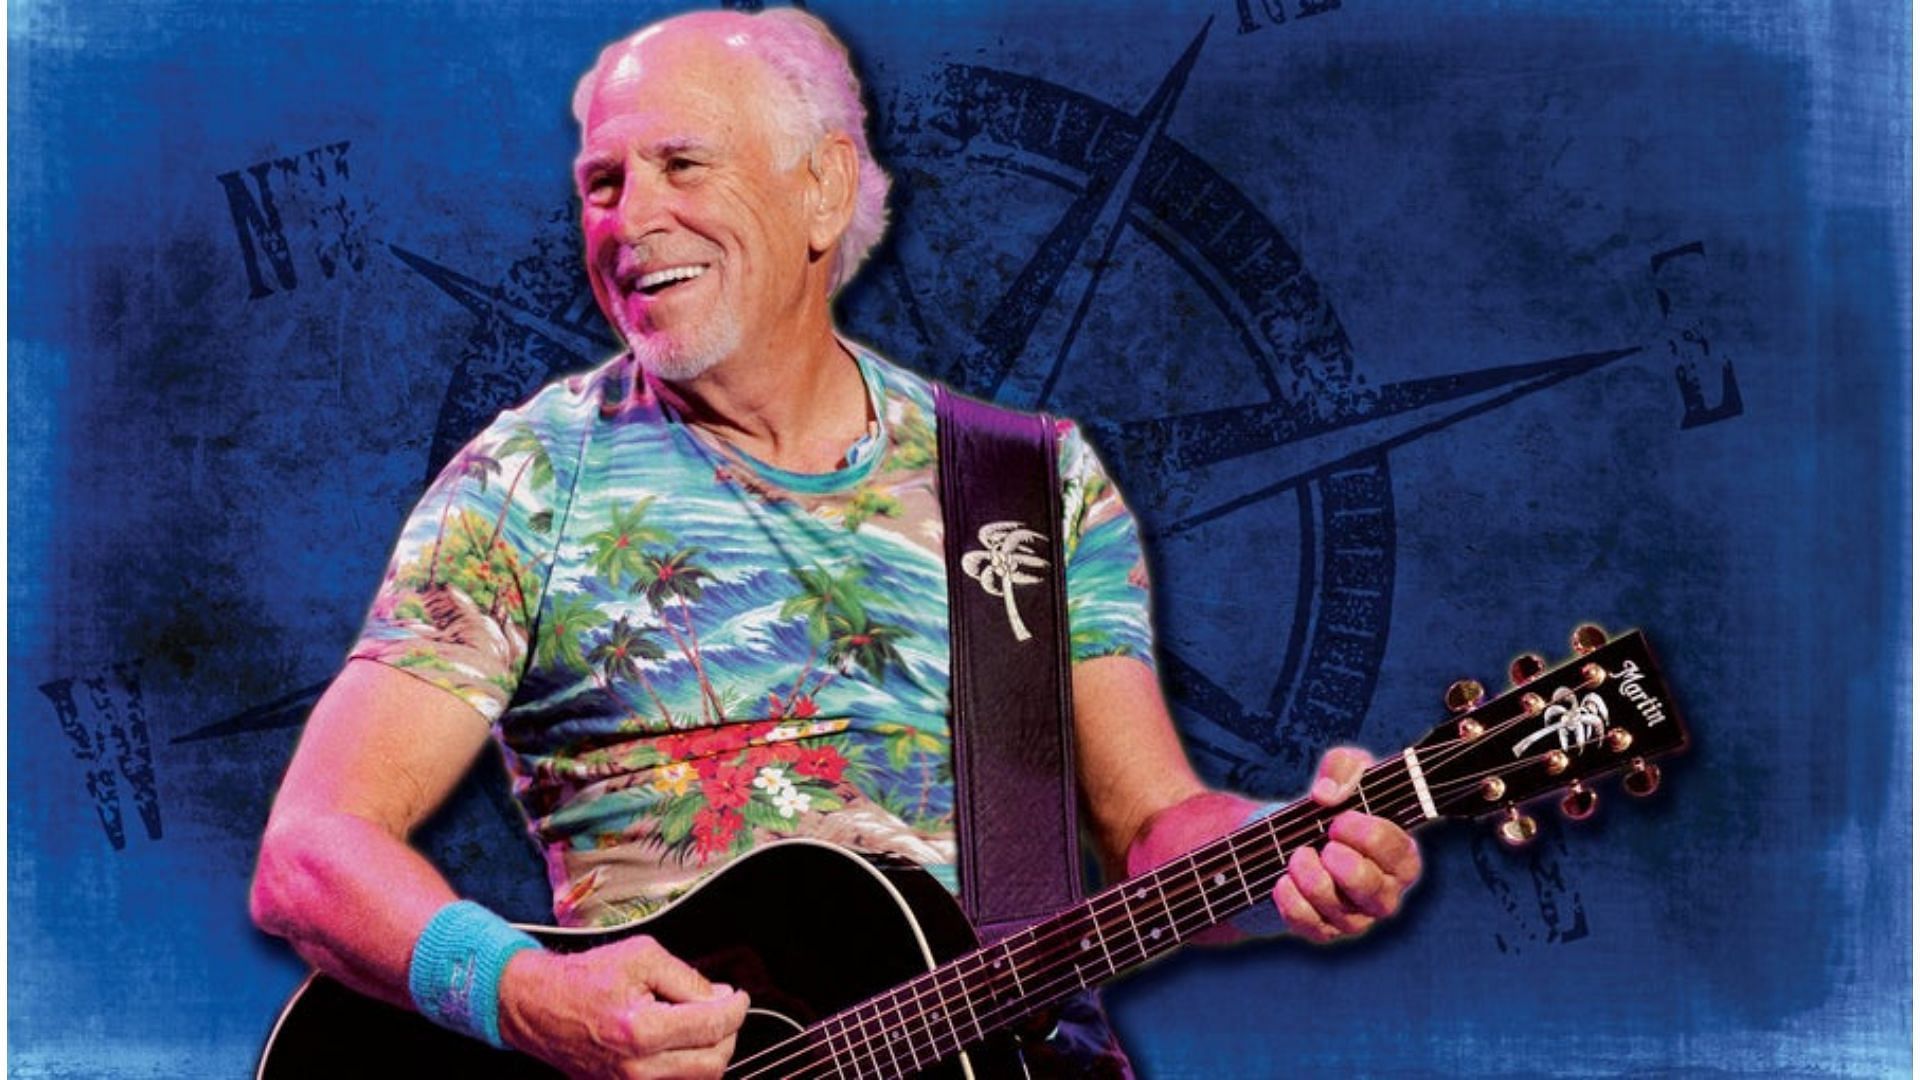 Tour Jimmy Buffett Tour 2023 Tickets, presale, where to buy, price, and more